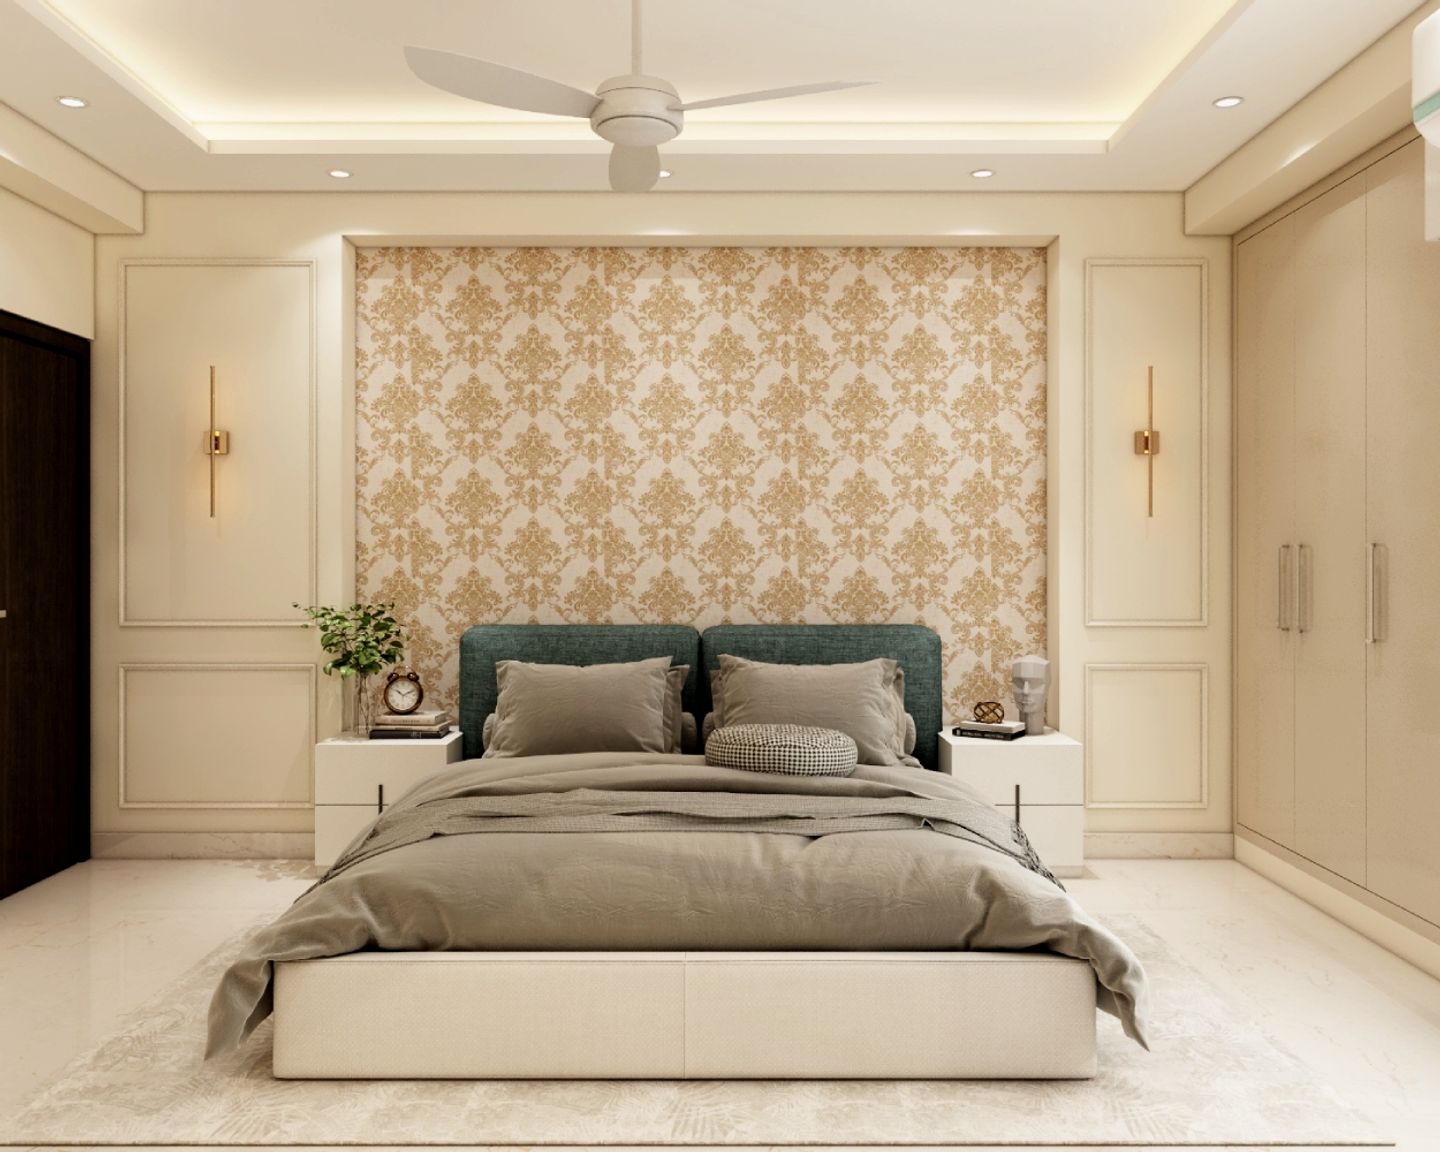 Master Bedroom With Queen-Size Bed And Dark Green Headboard, Side Tables And Beige Wall With Damask Wallpaper - Livspace